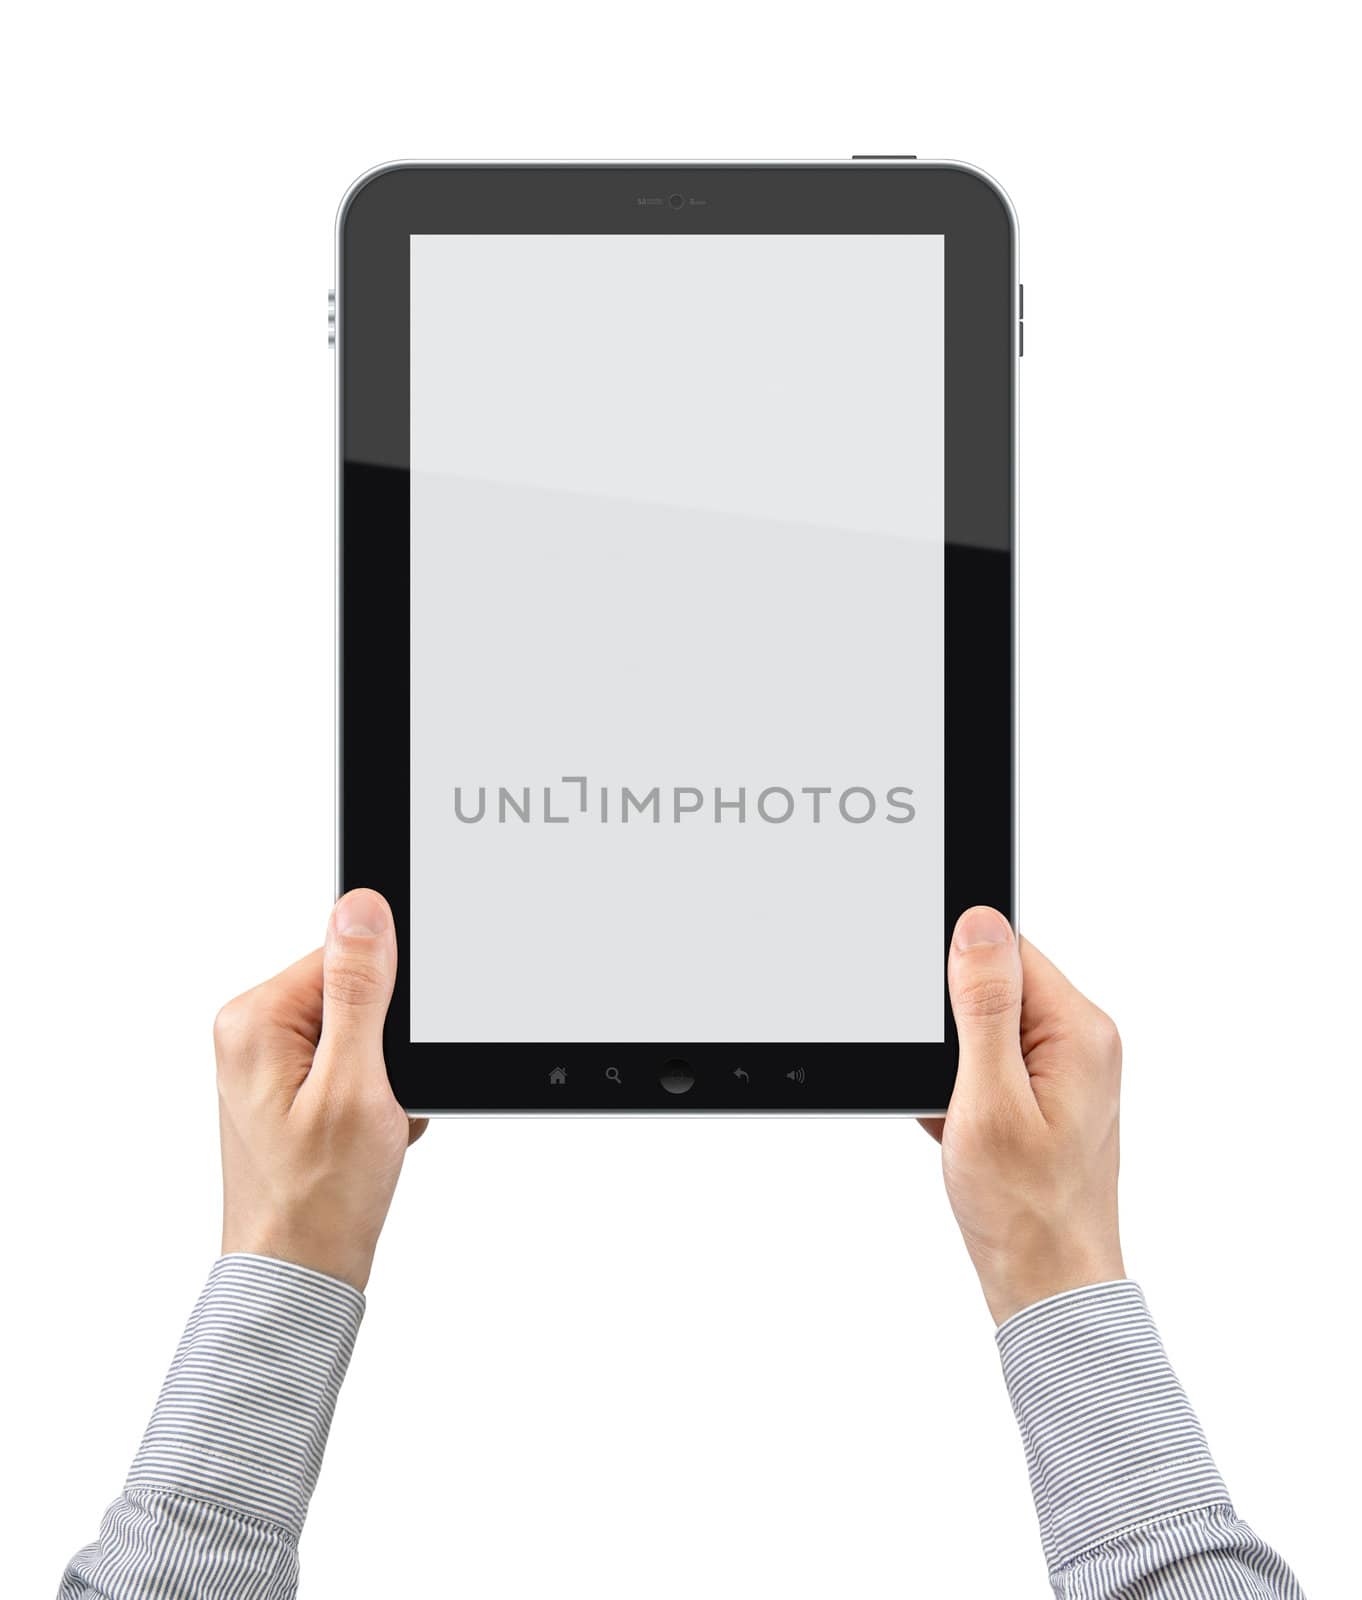 Hands are holding the touch screen device. Vertical composition. Isolated on white.